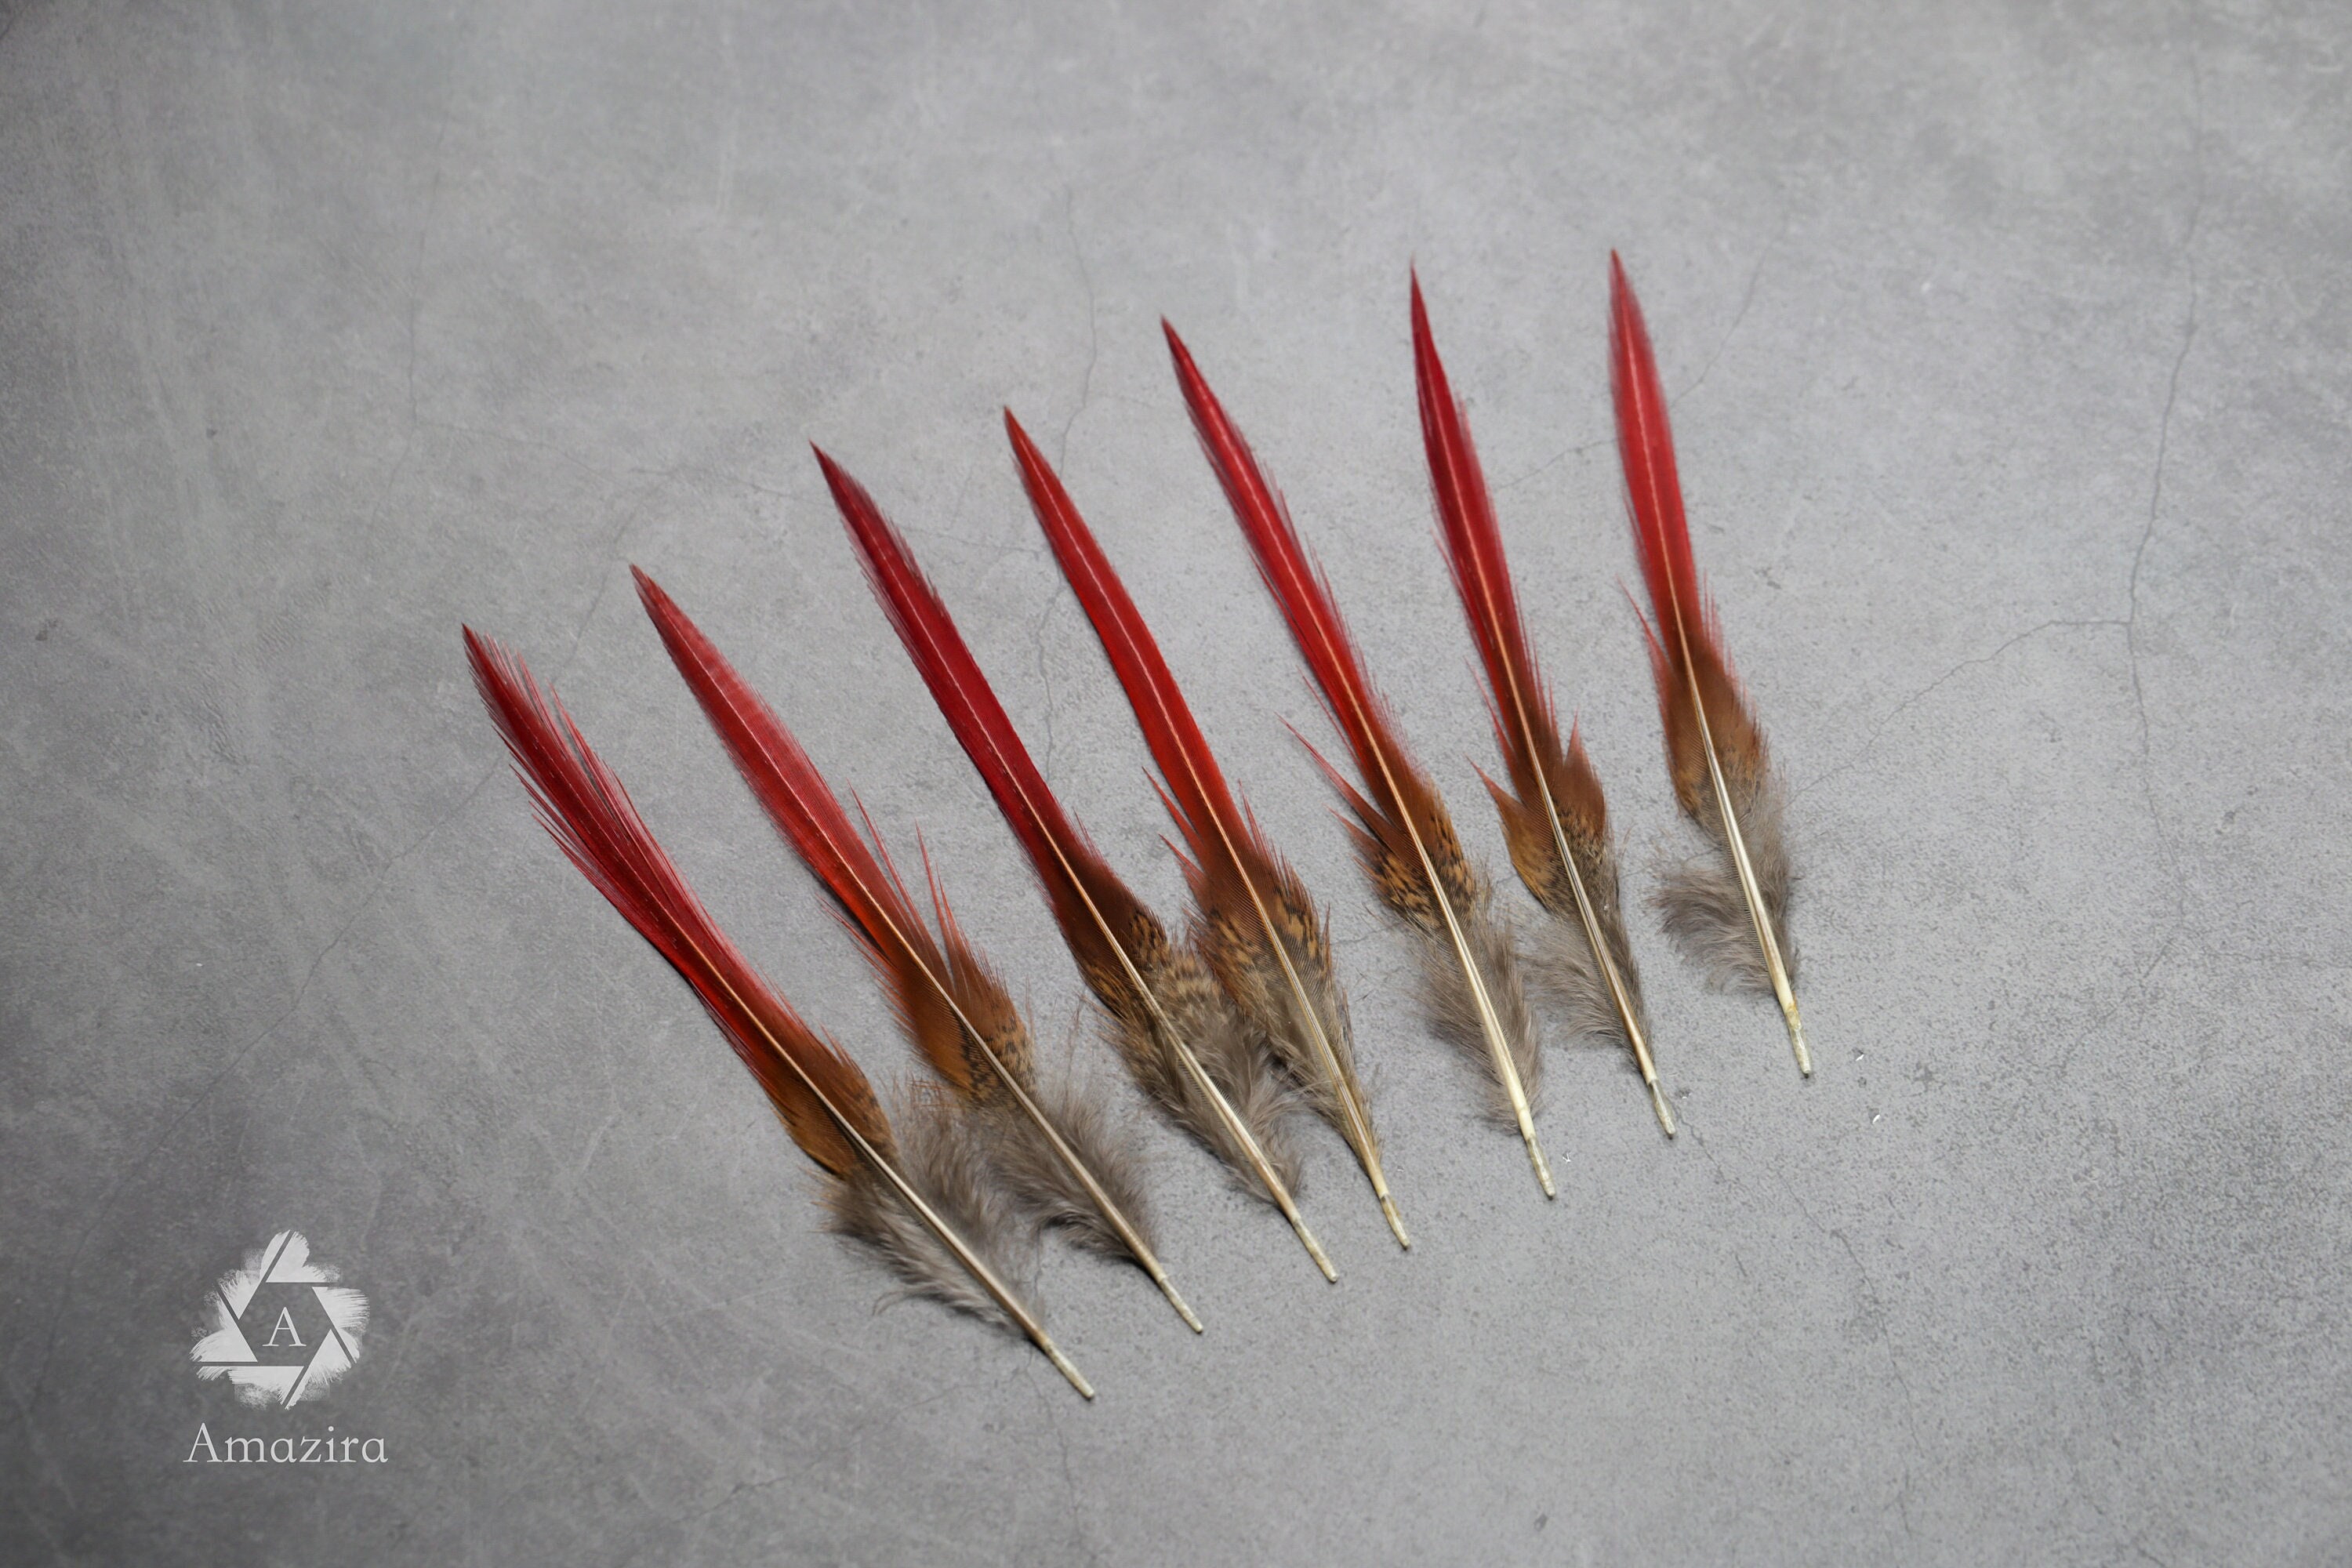 Small Natural Red Tip Golden Pheasant Feathers, 2-3 Inches 5-7 Cm